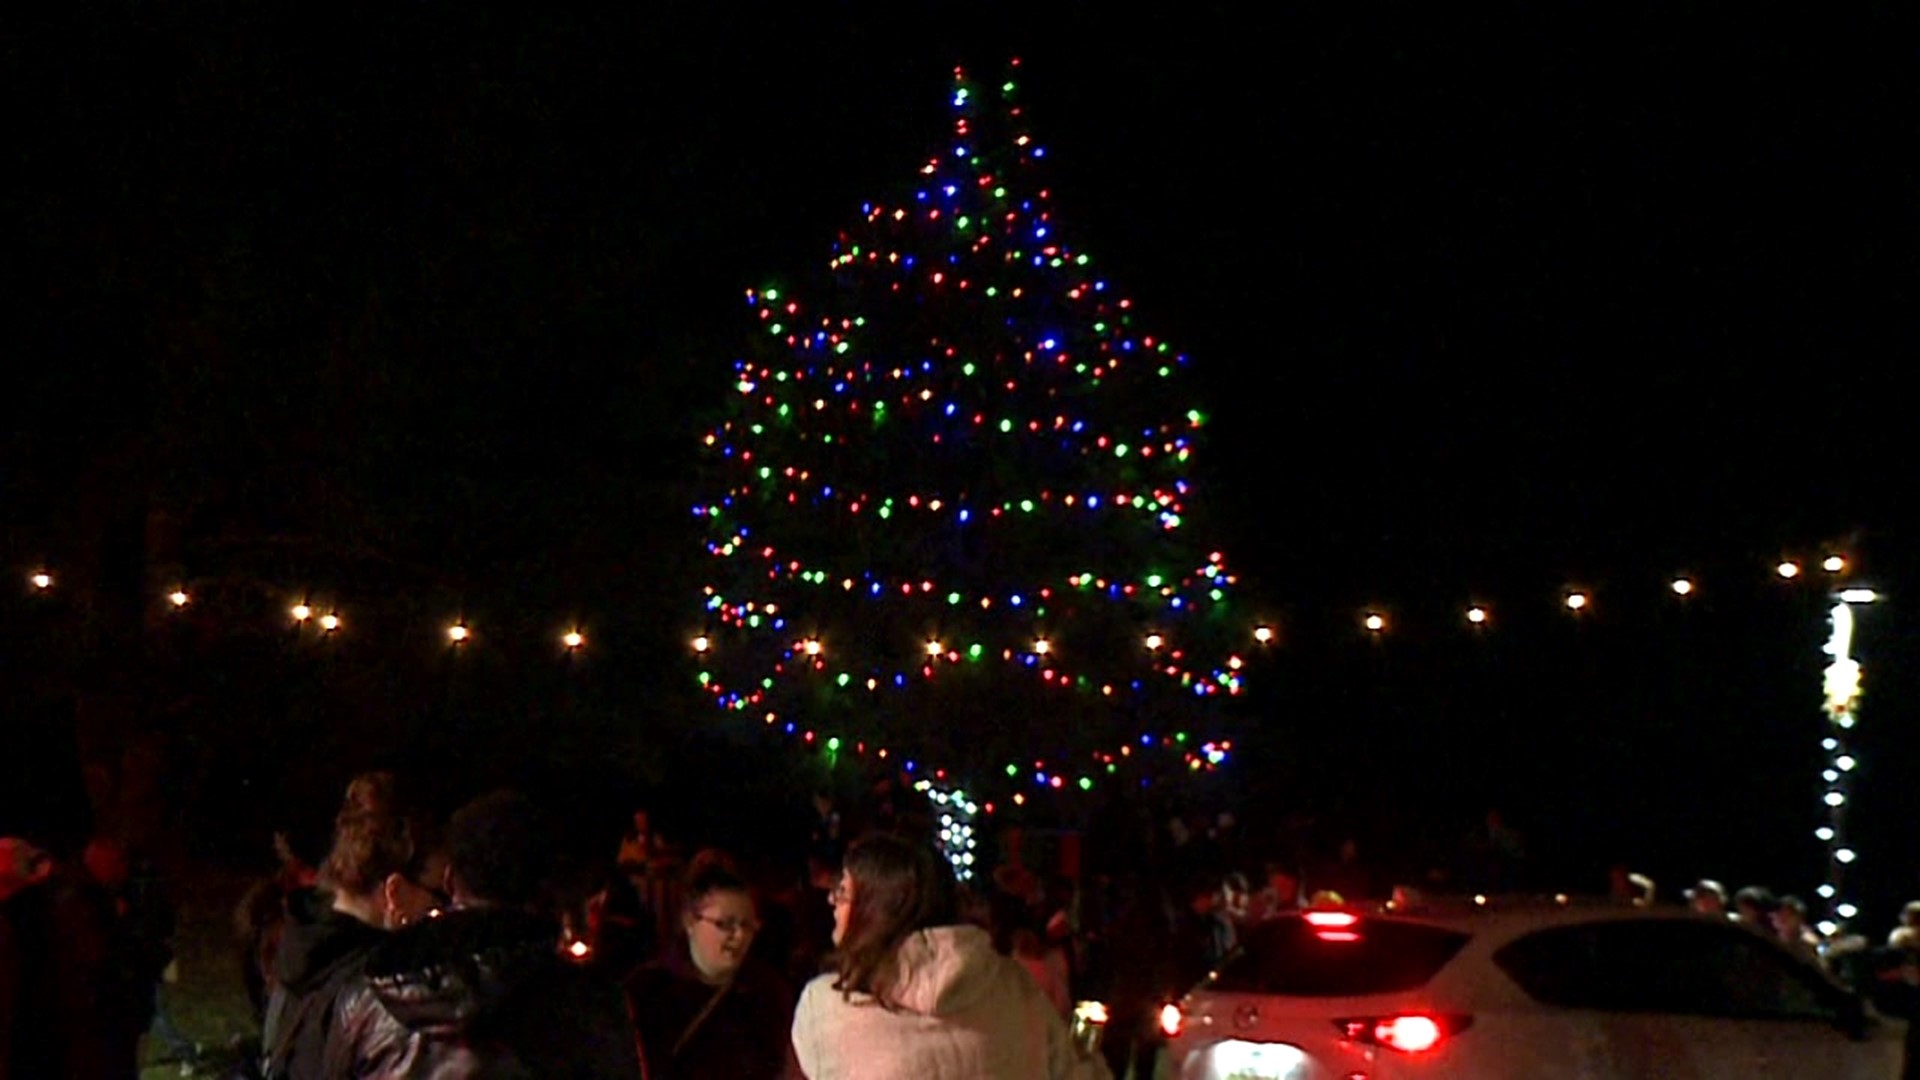 The tree lighting was held at Echo Lake Park Saturday evening.